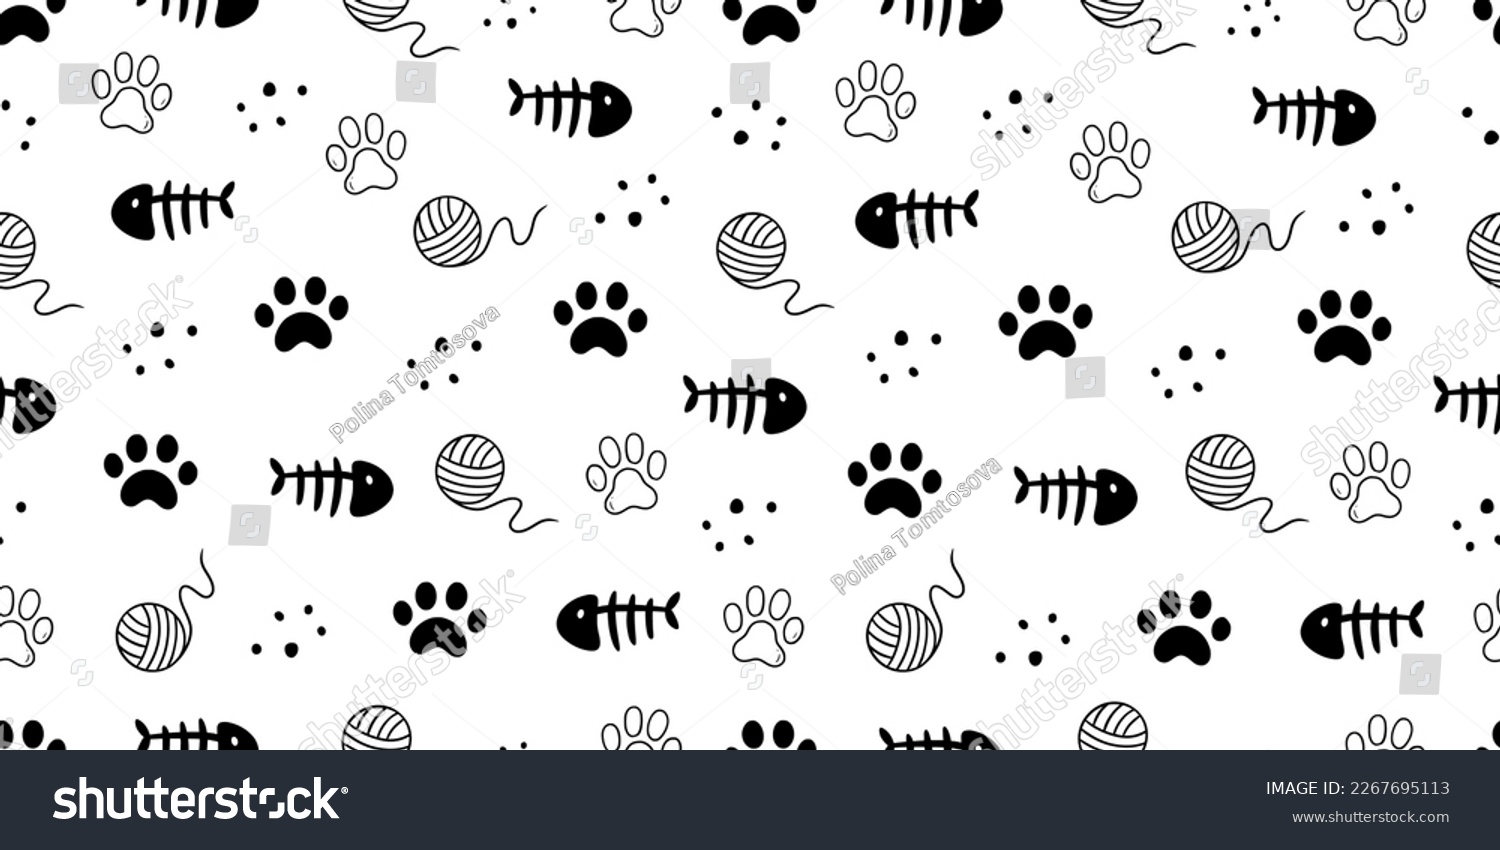 Cat toy, fooprint pattern seamless. Hand drawn sketch doodle kitty cute element on white background. Fish bone, footprint, cat toy element. Pet veterinary pattern. Vector illustration. #2267695113